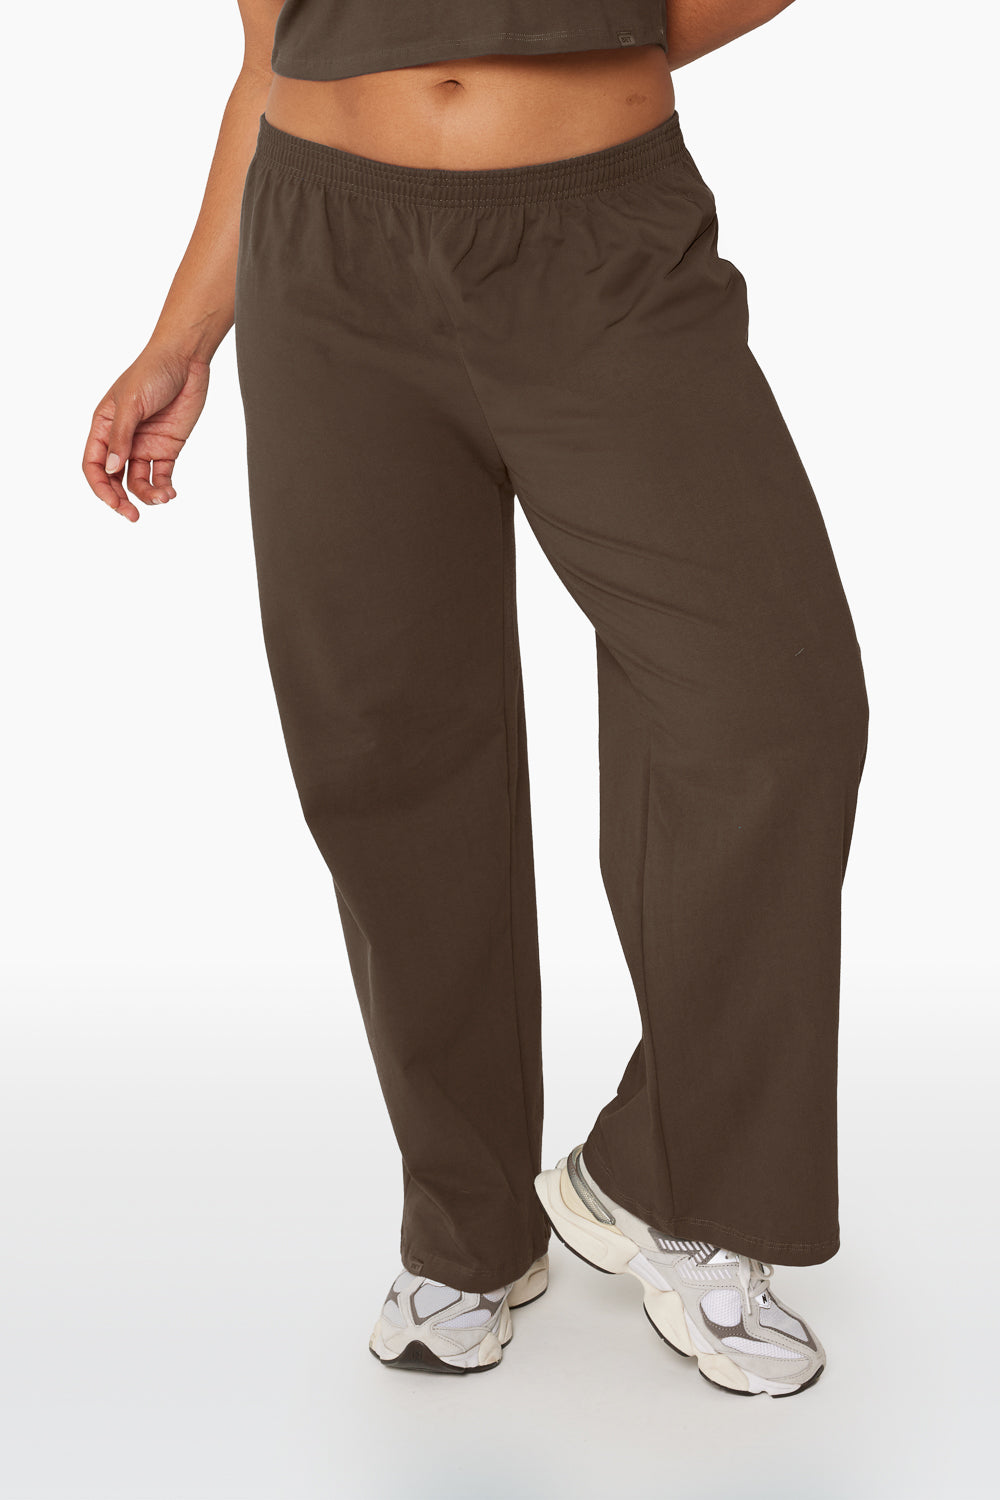 HEAVY COTTON EASY PANTS - BROWNSTONE Featured Image